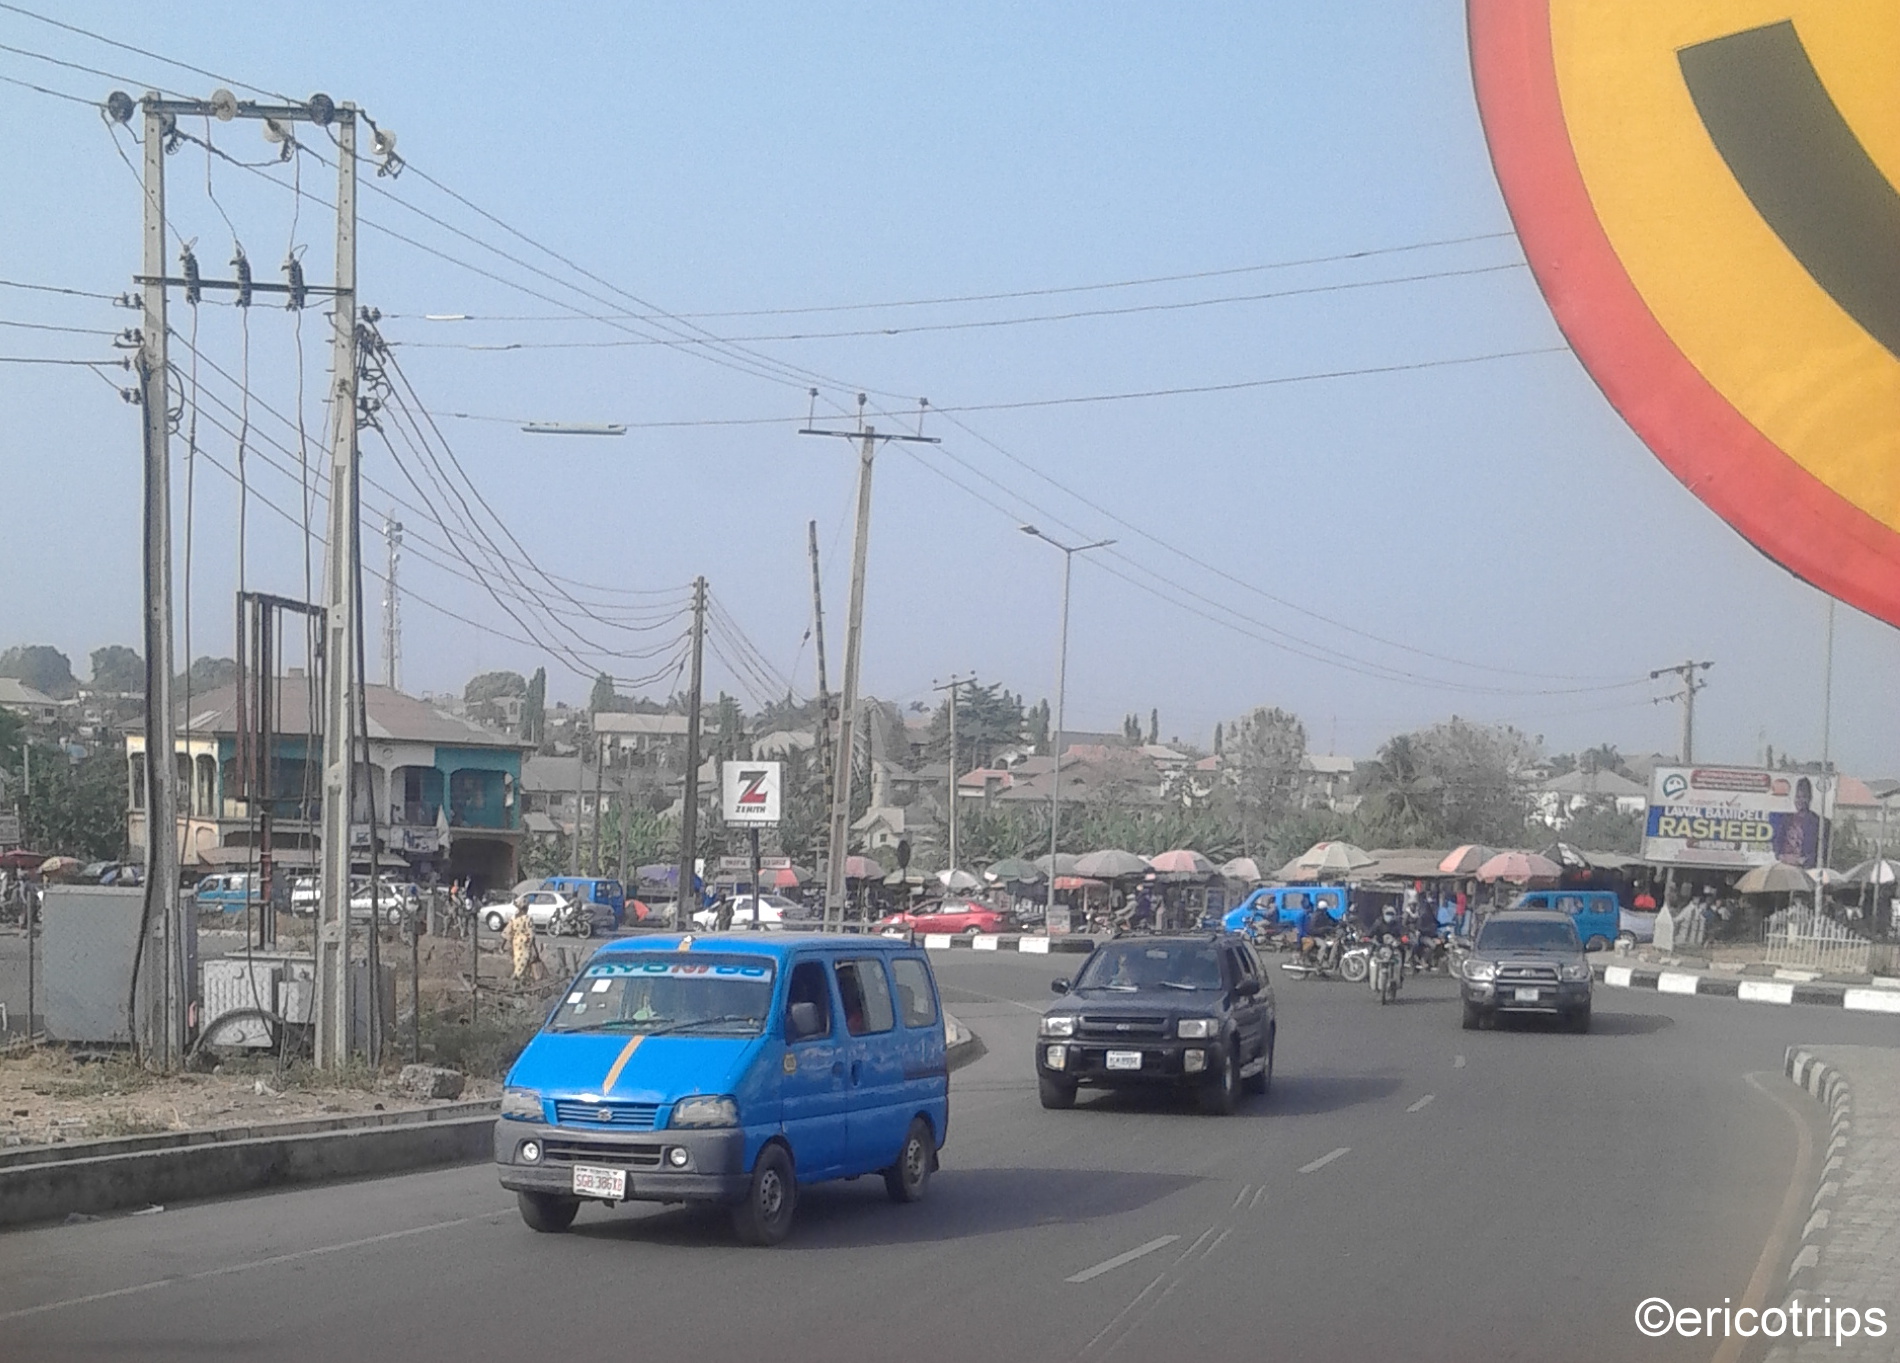 Minibus conveying commuters in Osogbo